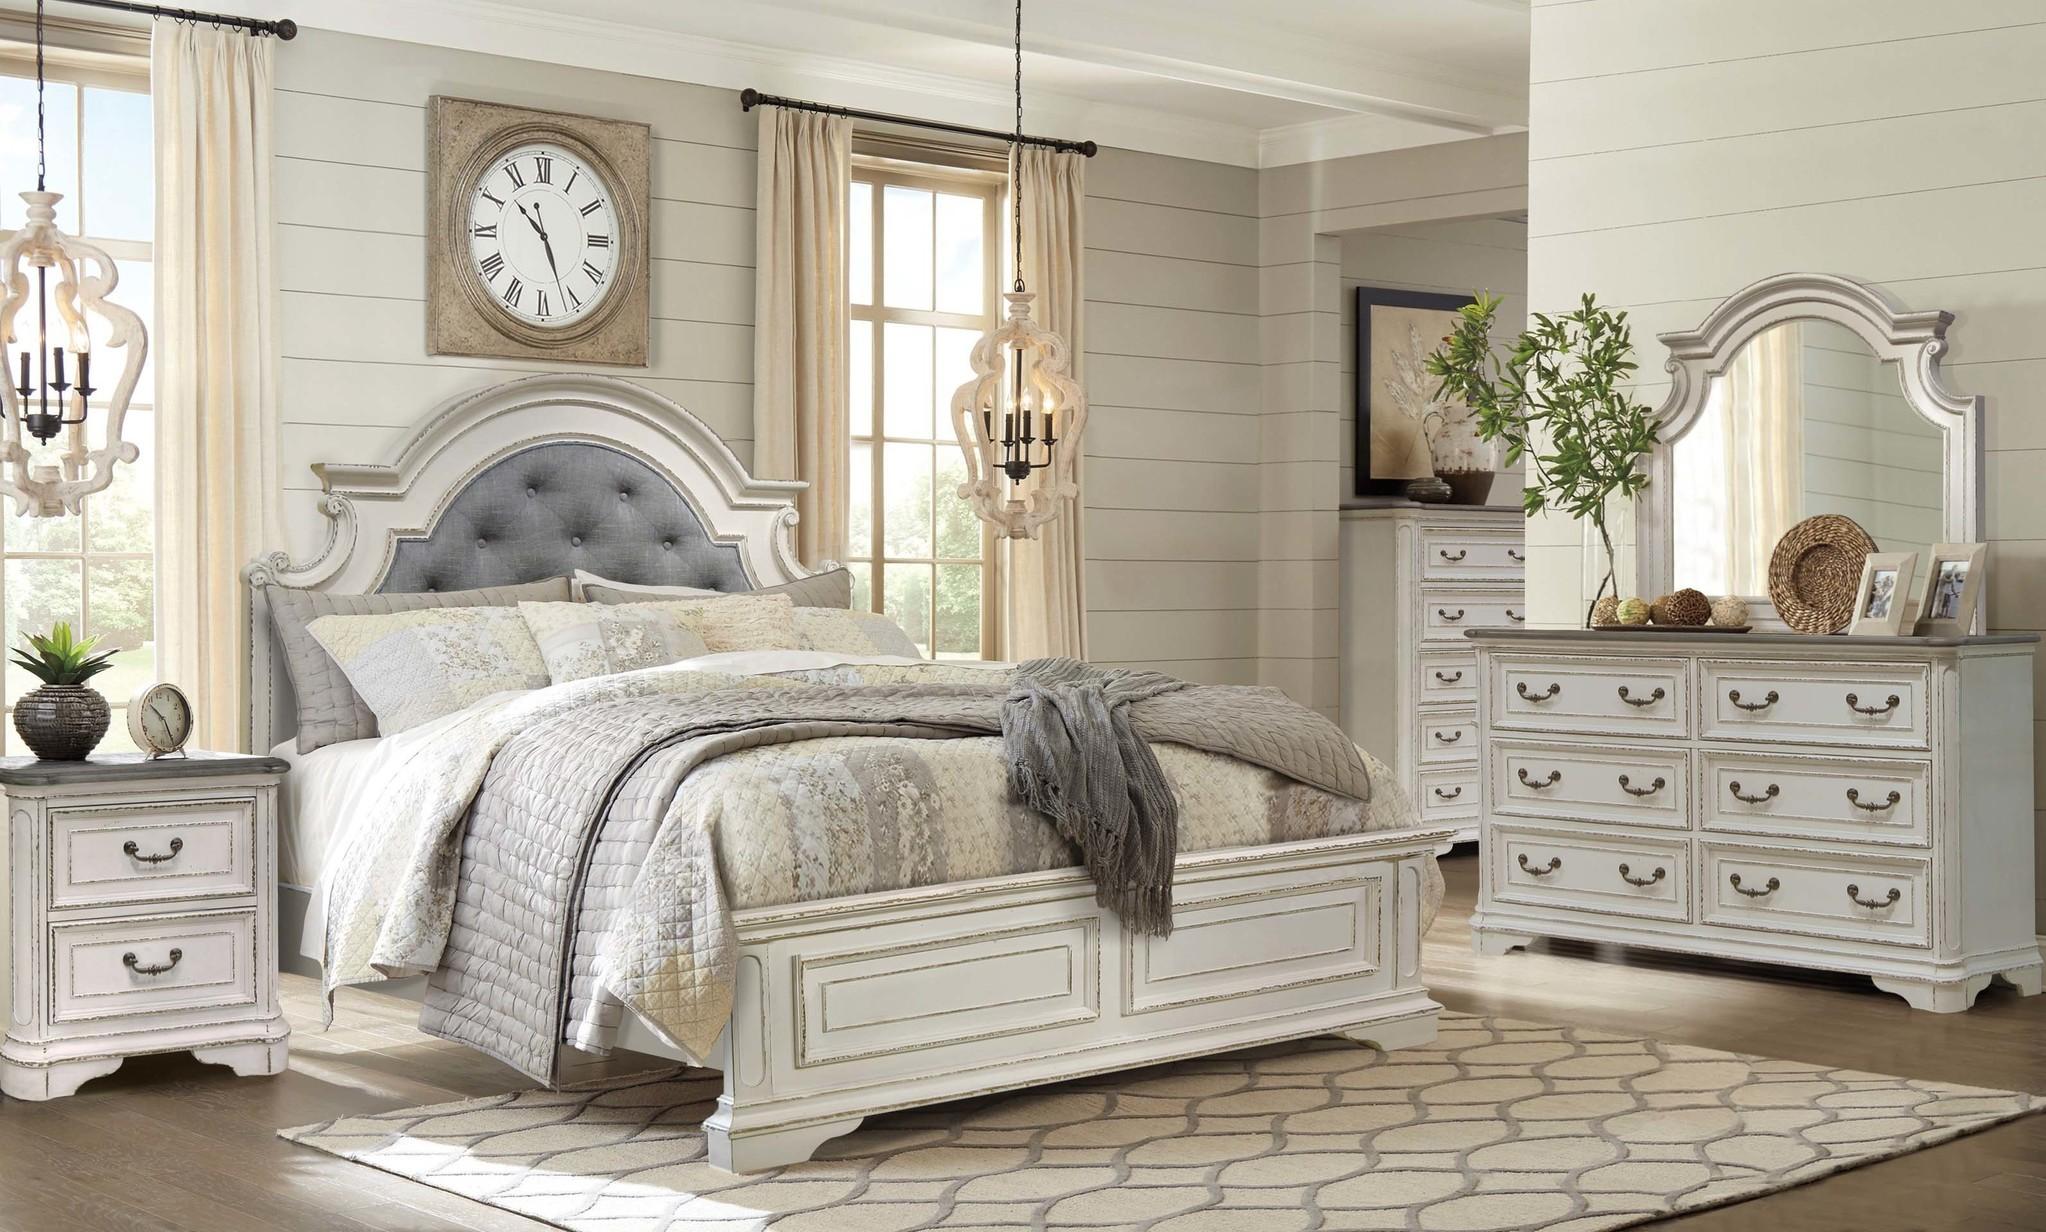 

    
Country Distressed Whitewash Upholstered Queen Bedroom Set 5Pcs McFerran B738
